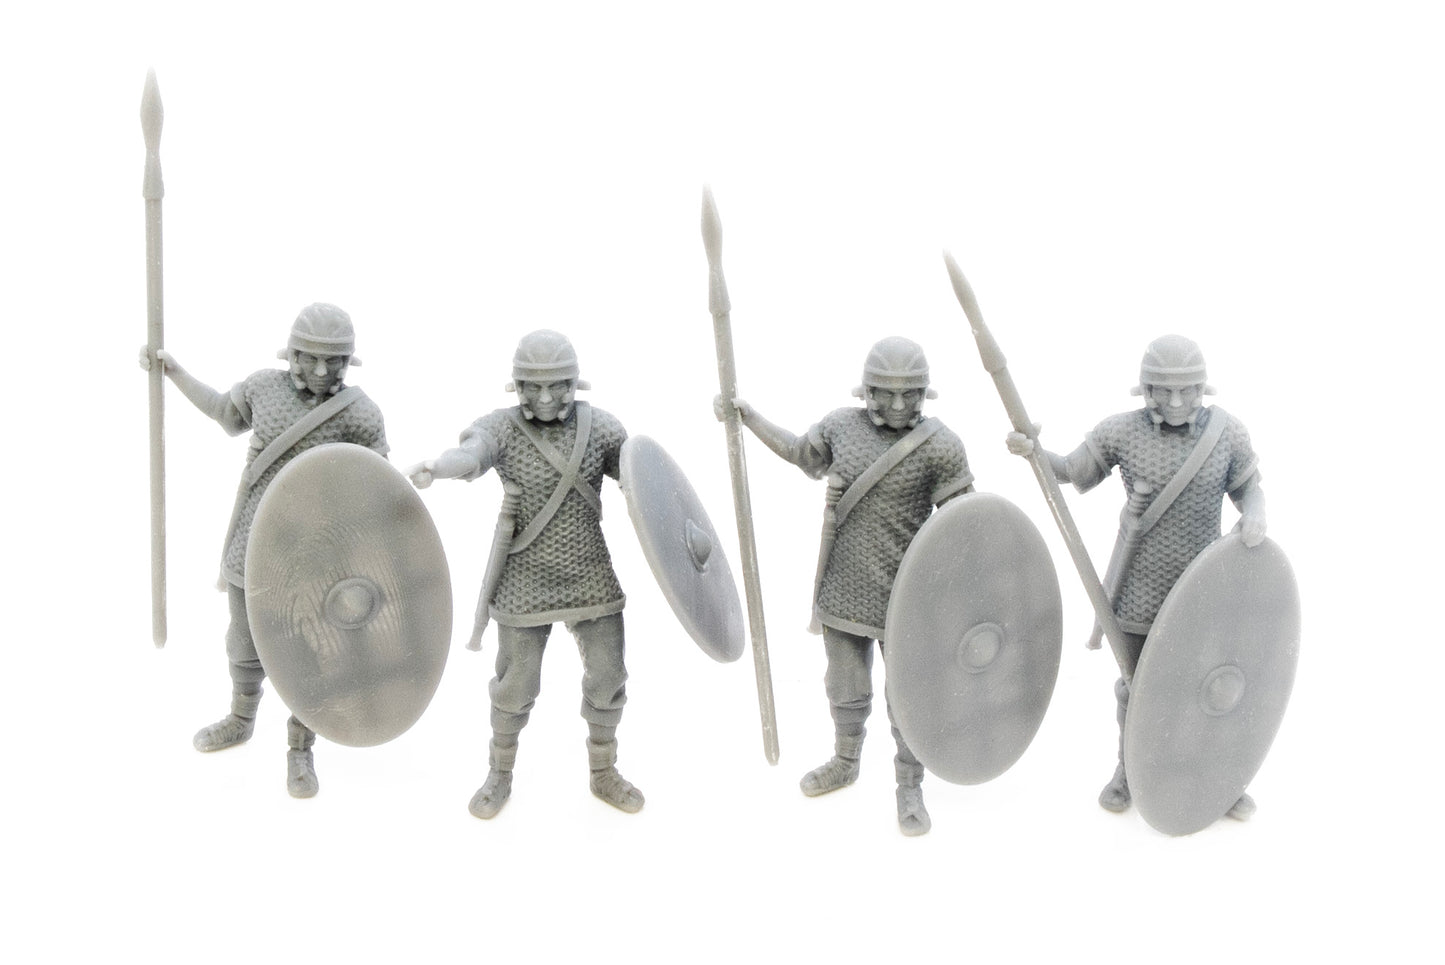 Early Imperial Roman Auxiliary Infantry.